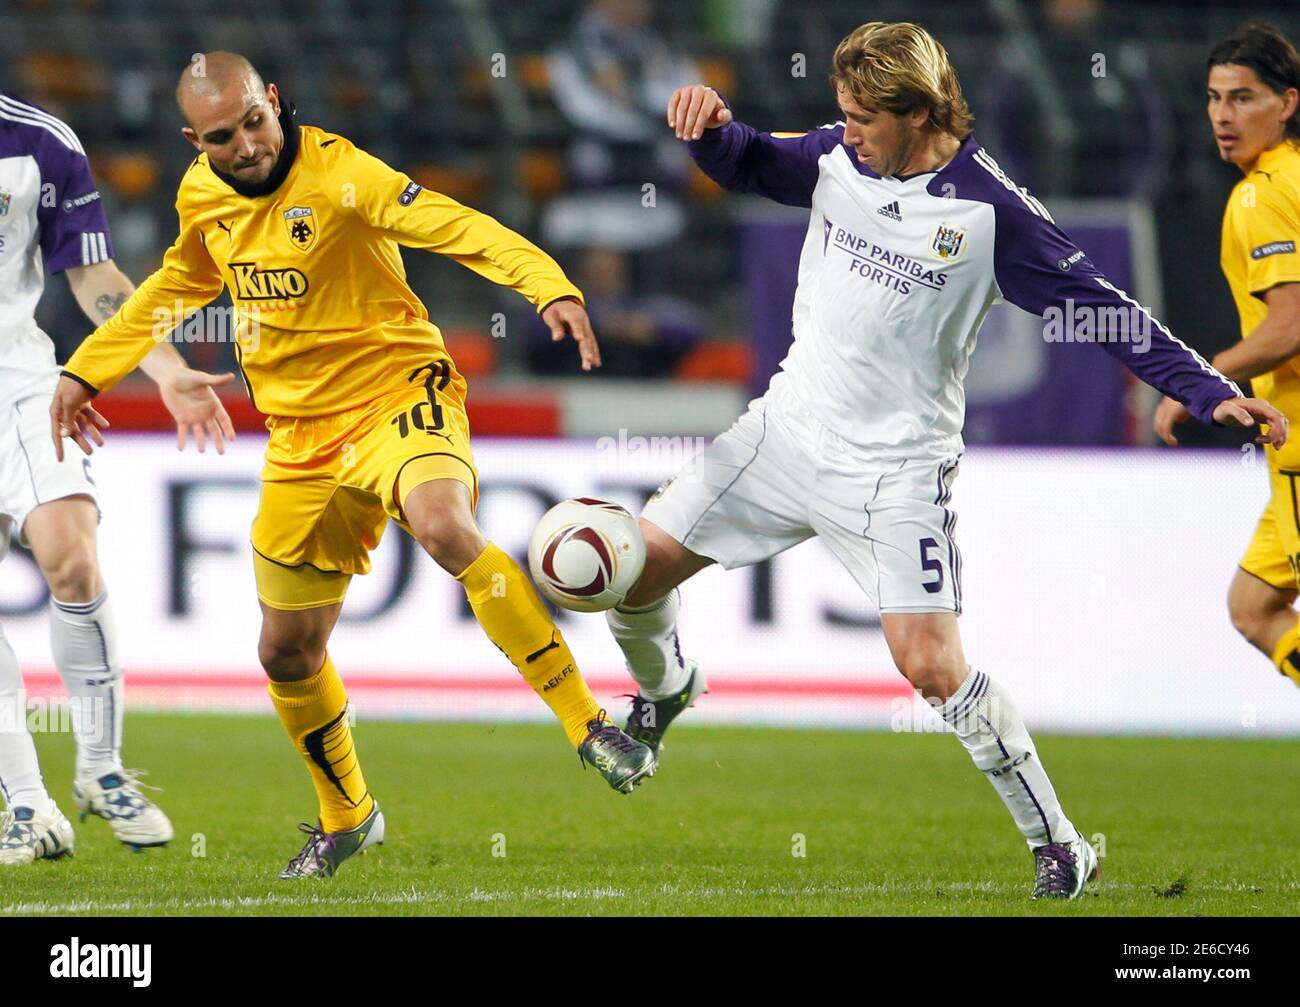 Anderlecht's Lucas Biglia (R) duels for the ball with AEK Athens' Rafik  Djebbour during their Europa League soccer match at the Constant Vanden  Stock stadium in Brussels October 21, 2010. REUTERS/Francois Lenoir (